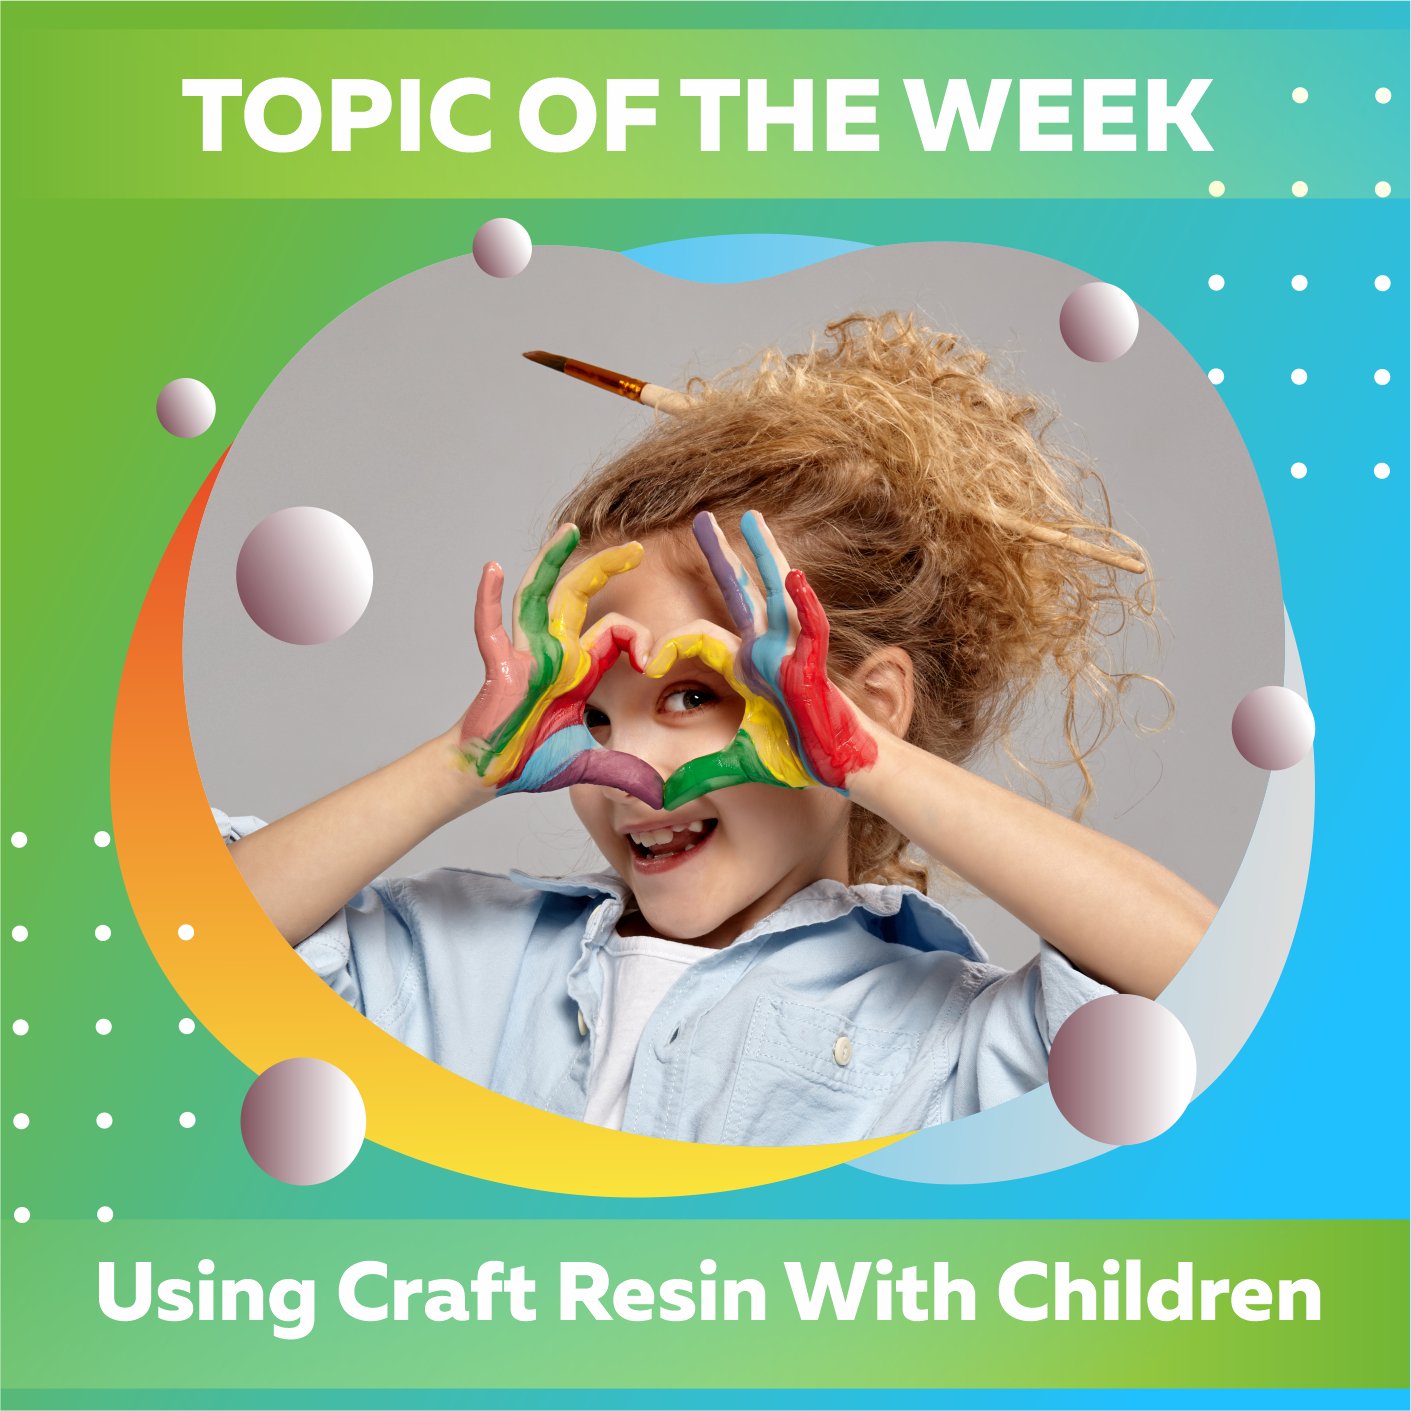 Using Craft Resin With Children - Craft Resin